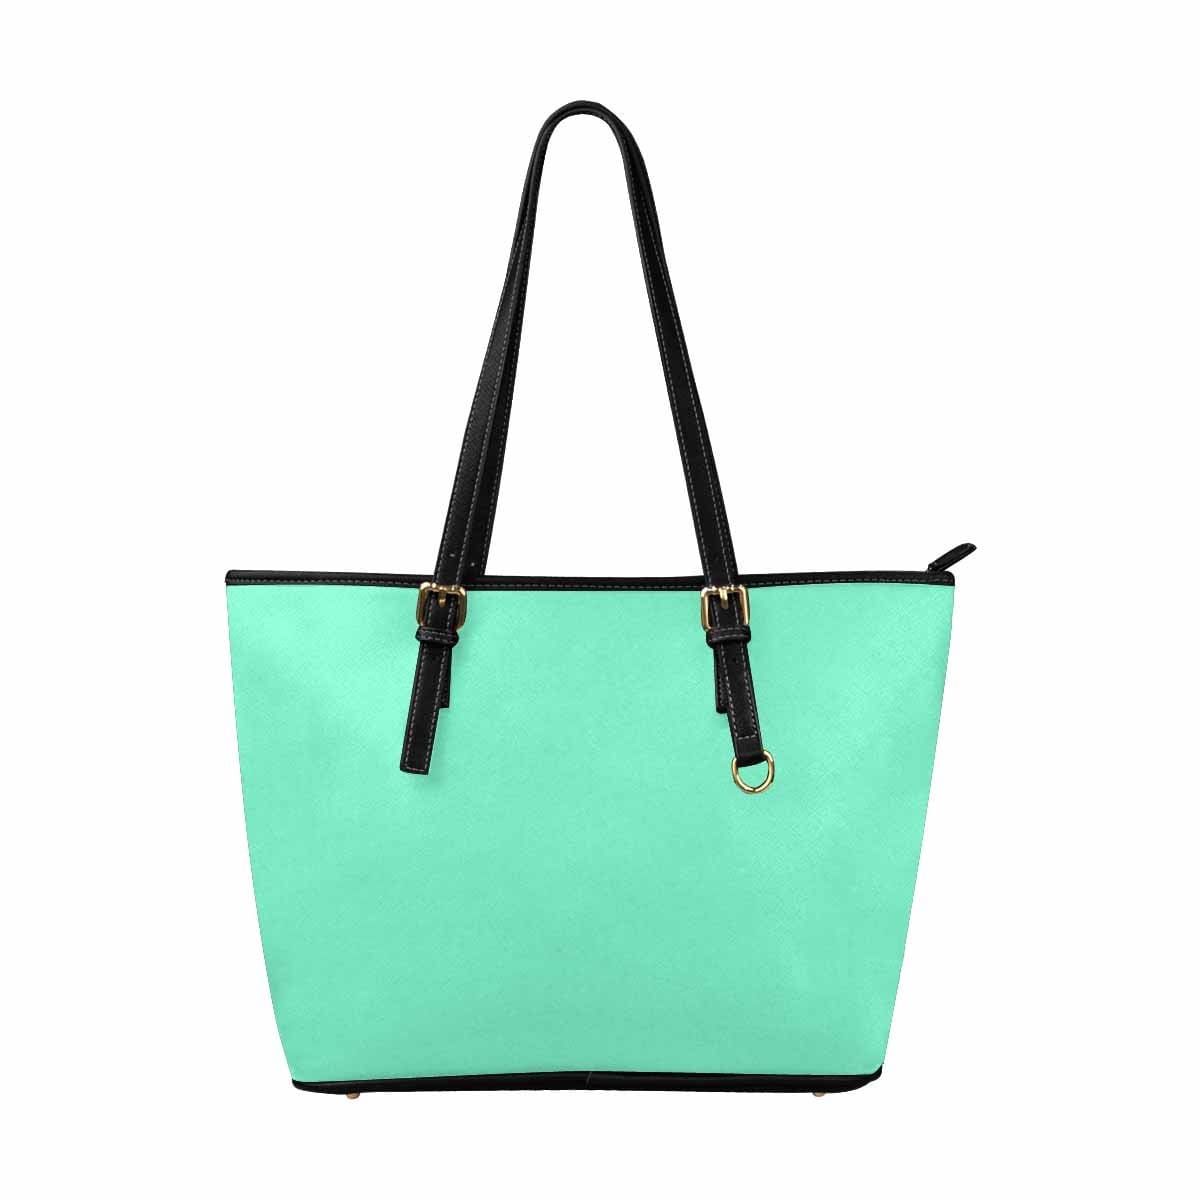 Large Leather Tote Shoulder Bag - Aquamarine Green - Bags | Leather Tote Bags